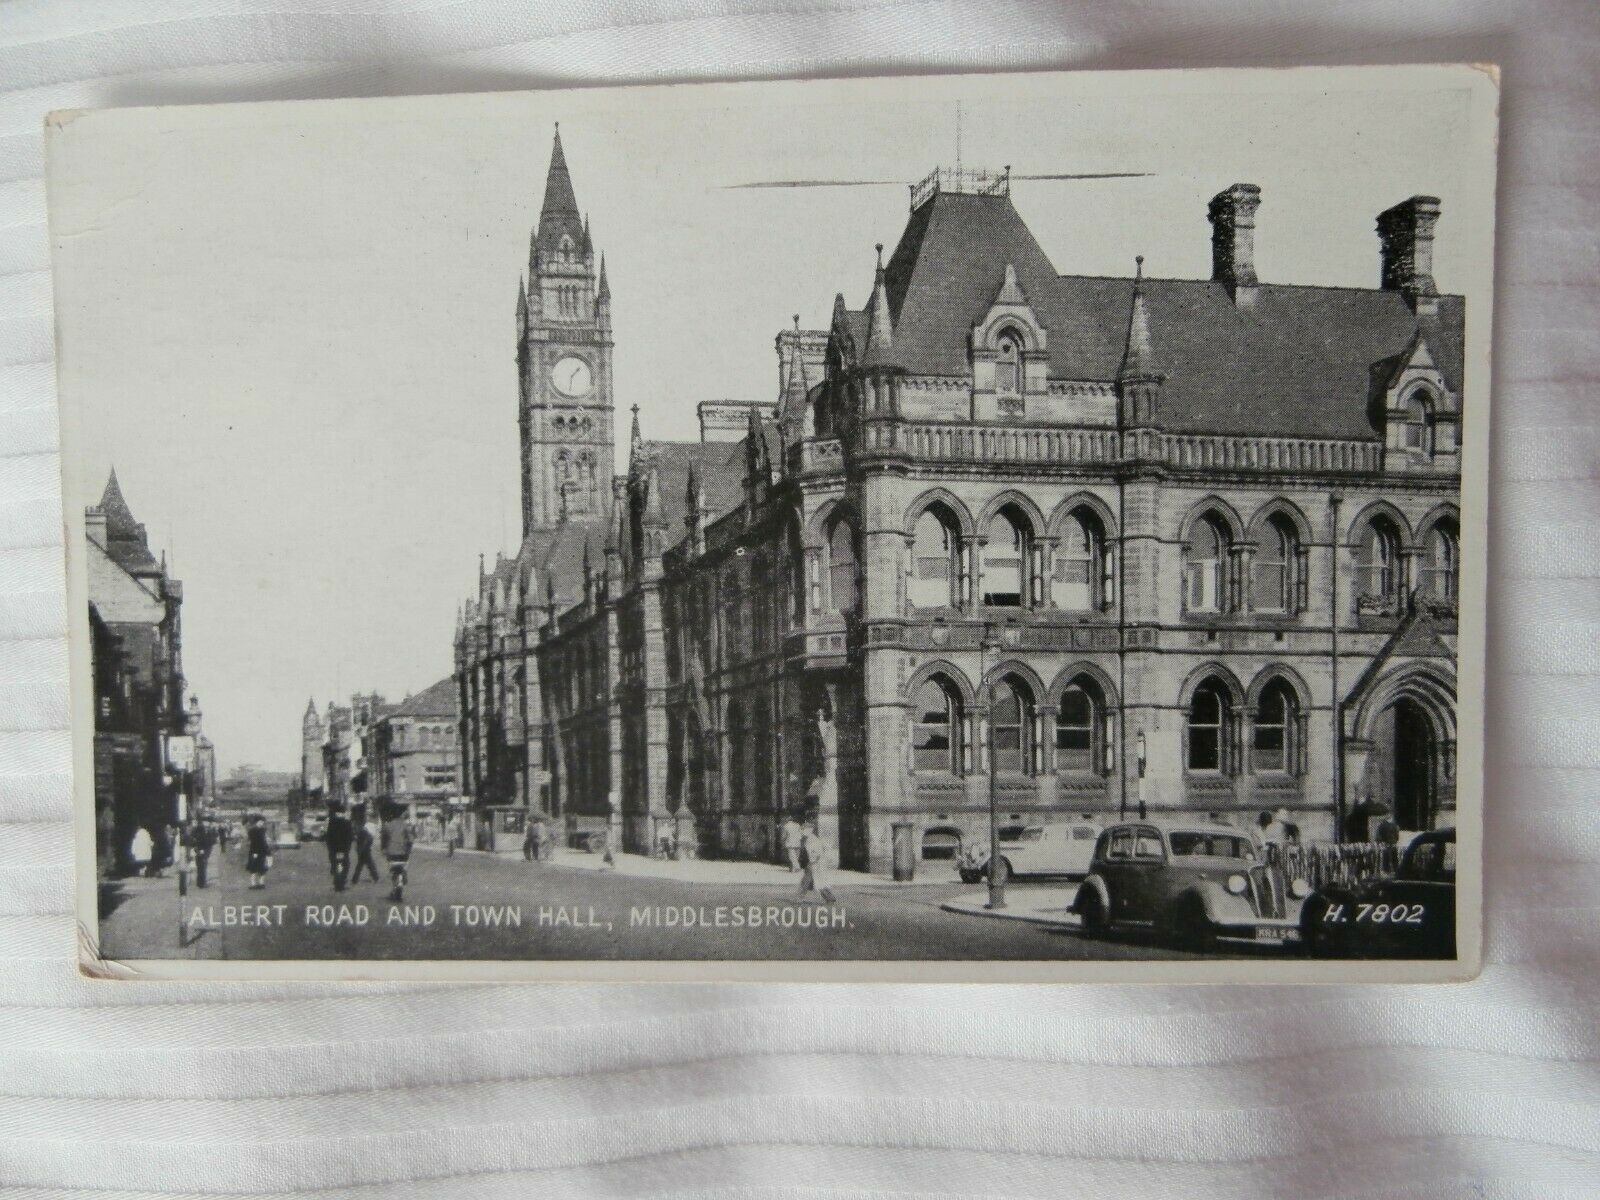 House Clearance - Middlesbrough, Yorkshire - Albert Road and Town Hall - 1956 service ( 75 )